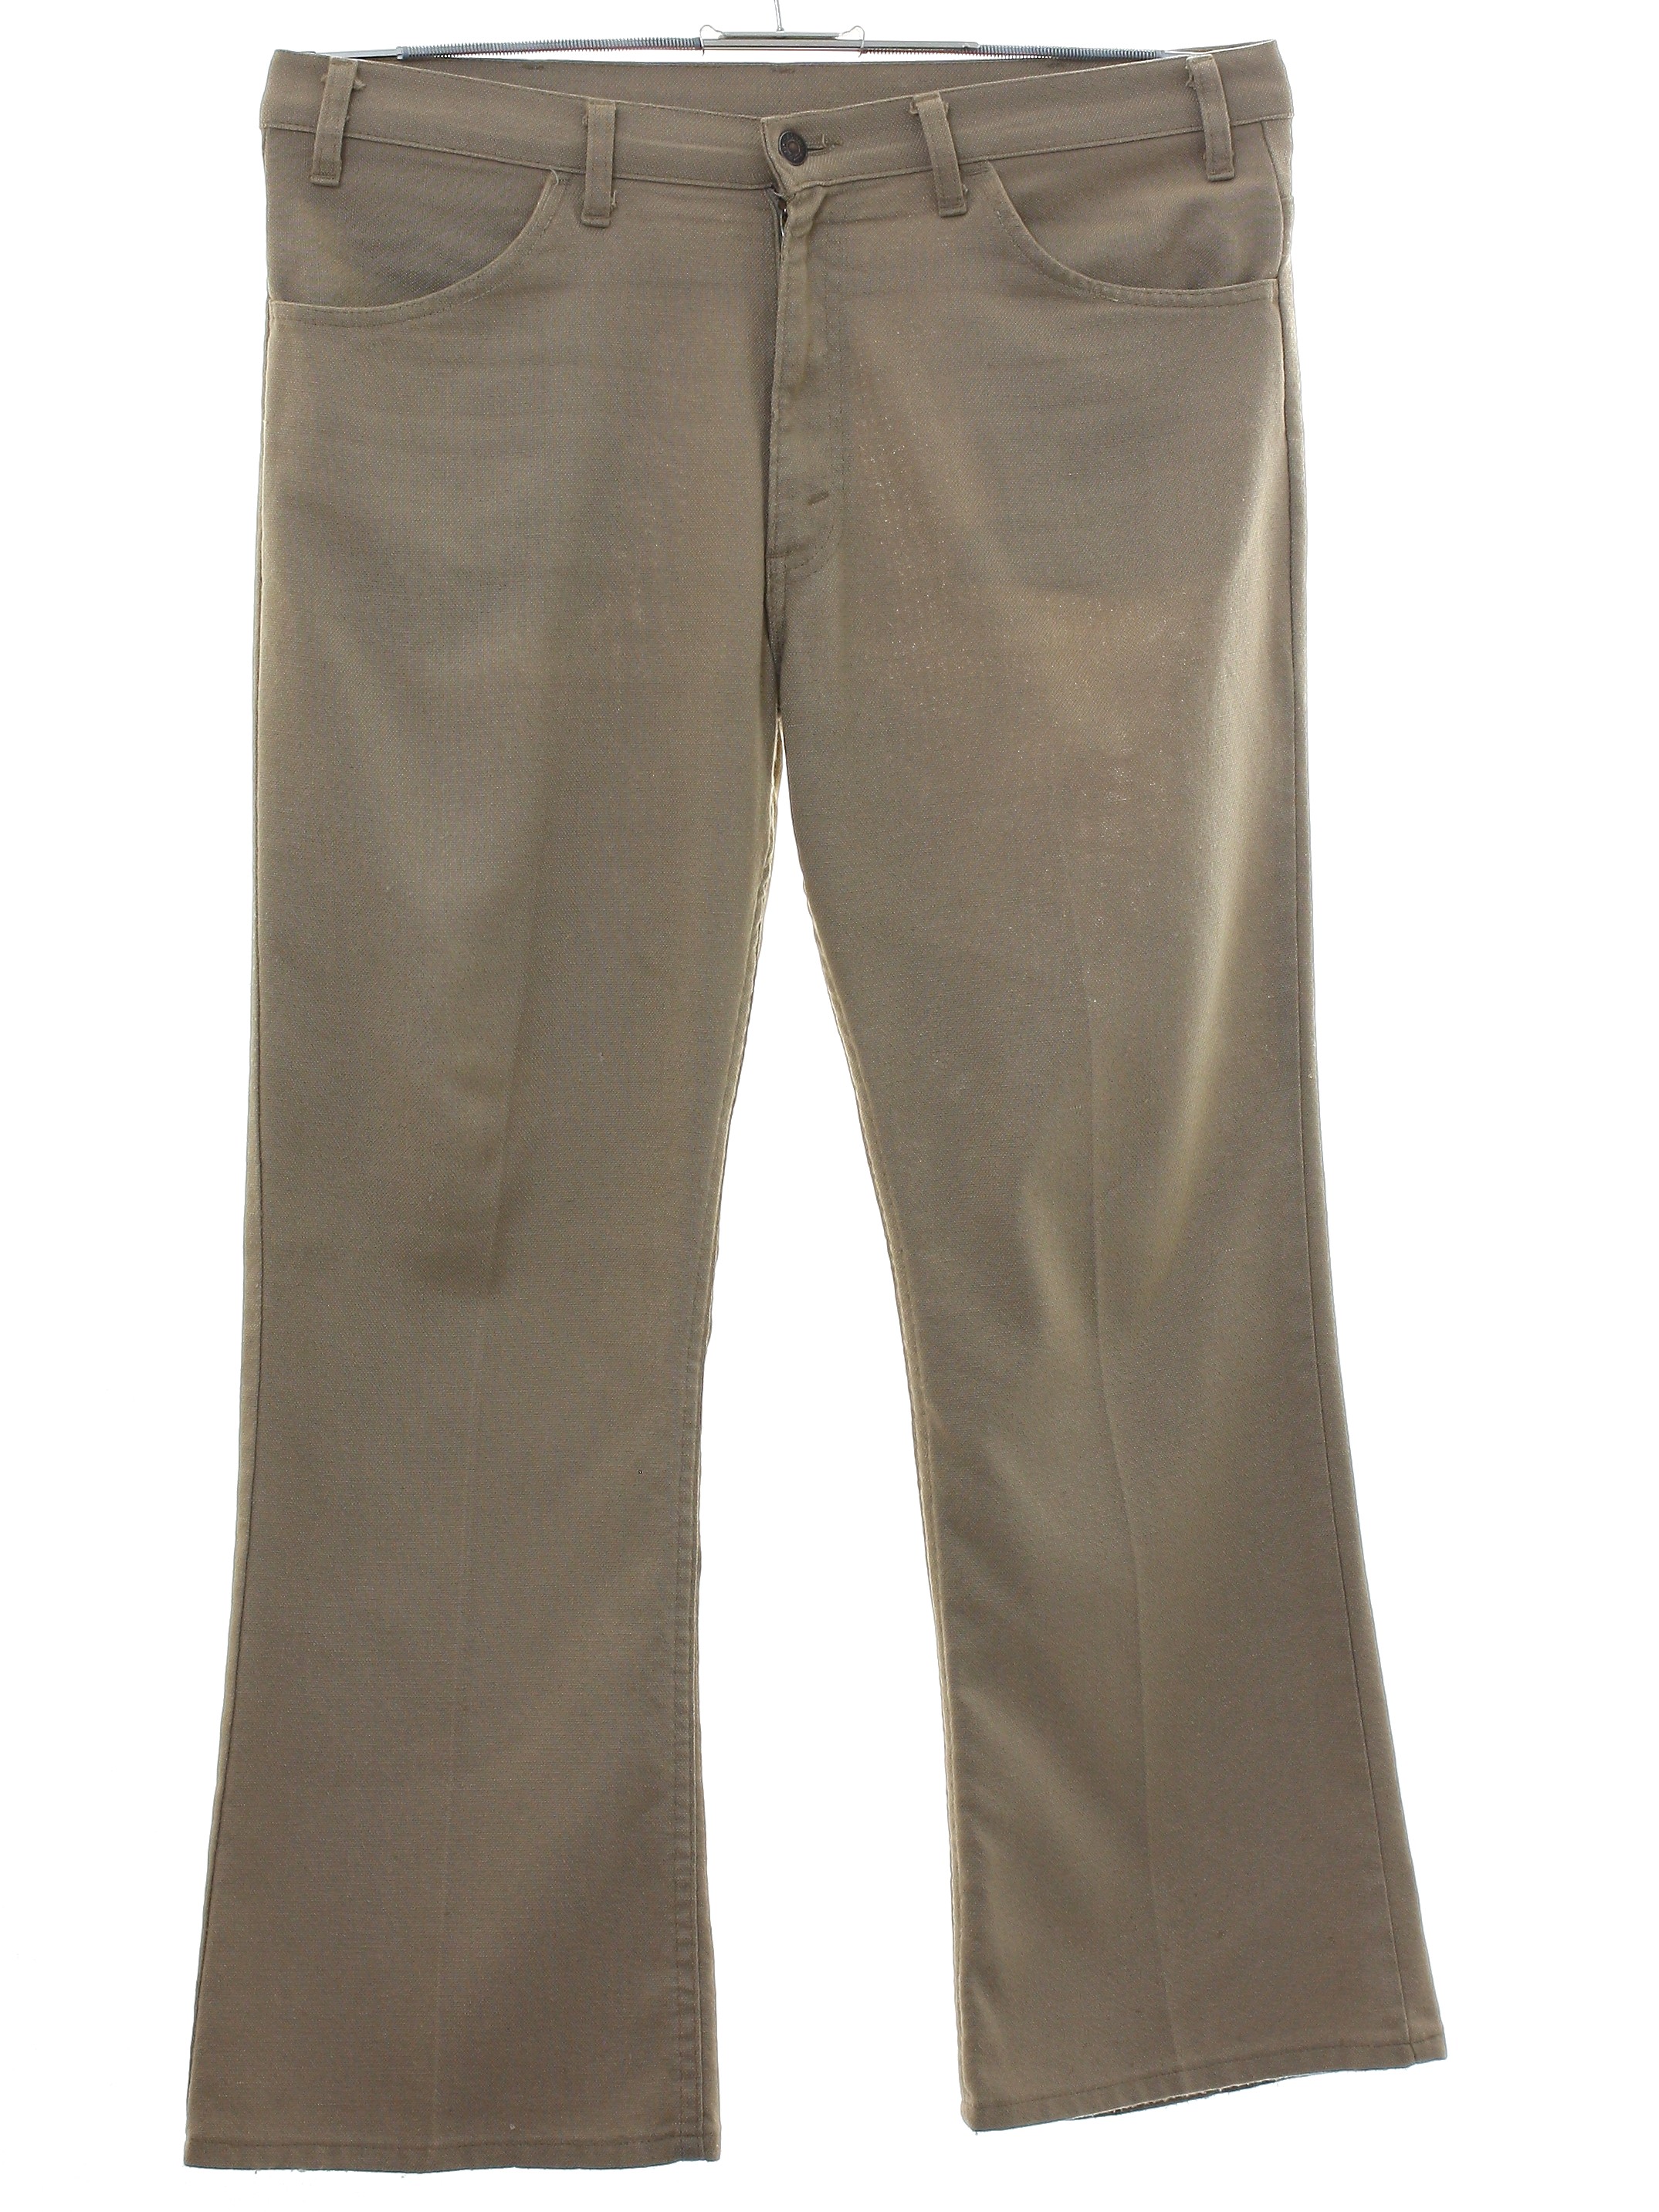 Retro Seventies Flared Pants / Flares: 70s -Levis Sta Prest- Mens tan brown  solid colored polyester cotton hopsack flat front flared jeans-cut pants  with cuffless hem, front scoop pockets, two rear patch